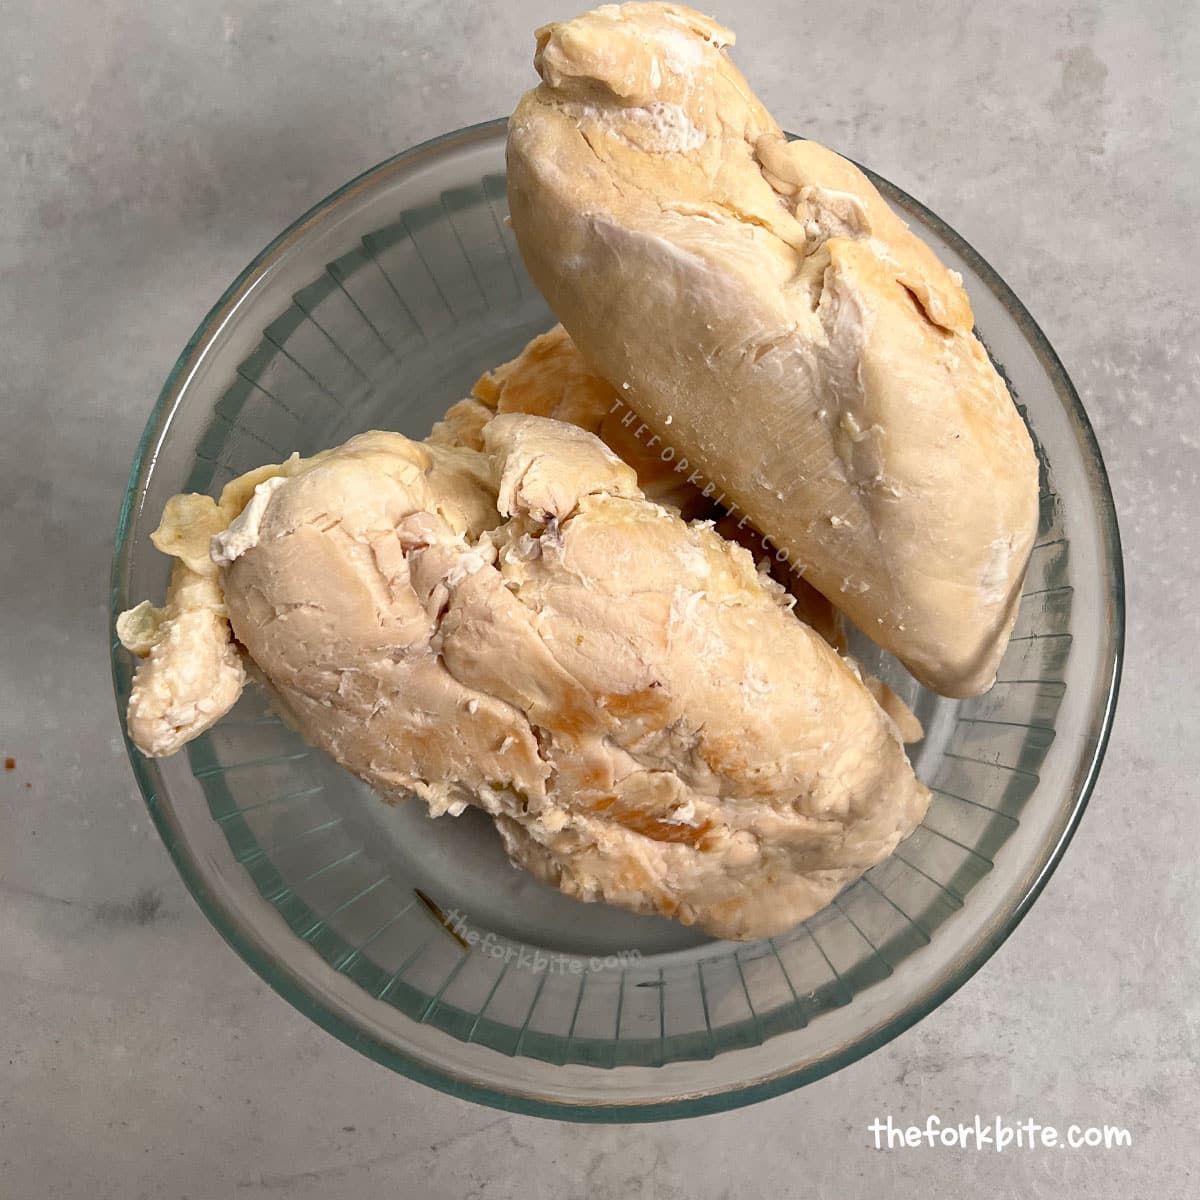 Shredding chicken with your hands is a great way to get the most tender and juicy shredded chicken. It also allows you to control the size of the shreds, which can be helpful when making certain recipes.